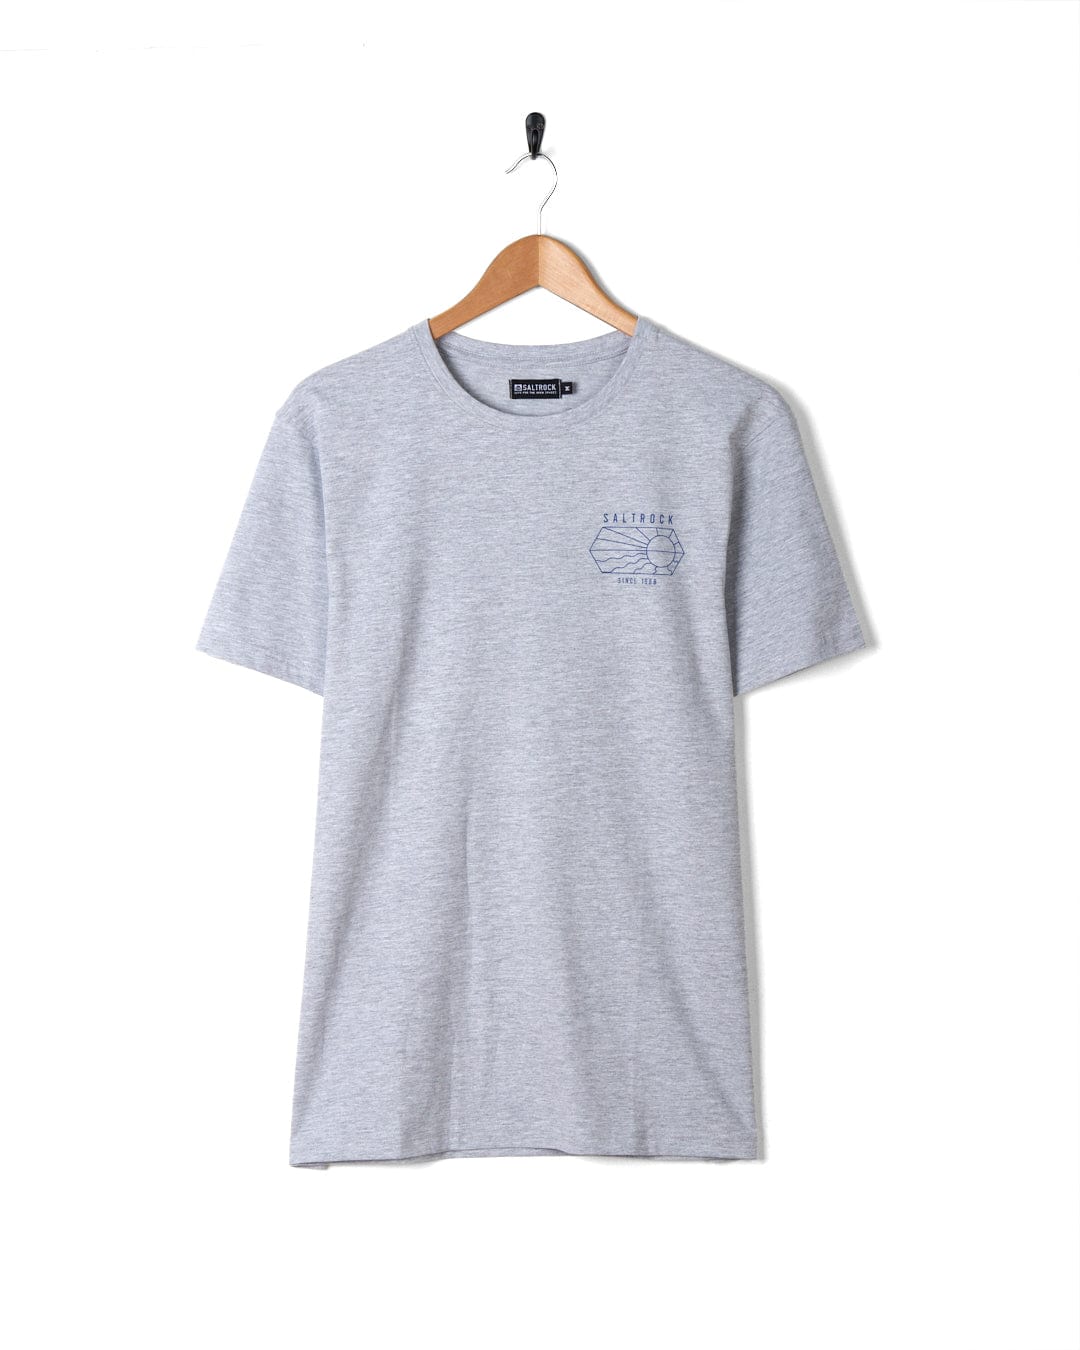 A Vantage Outline - Mens Short Sleeve T-Shirt - Grey Marl with a blue logo and crew neckline, featuring Saltrock branding.